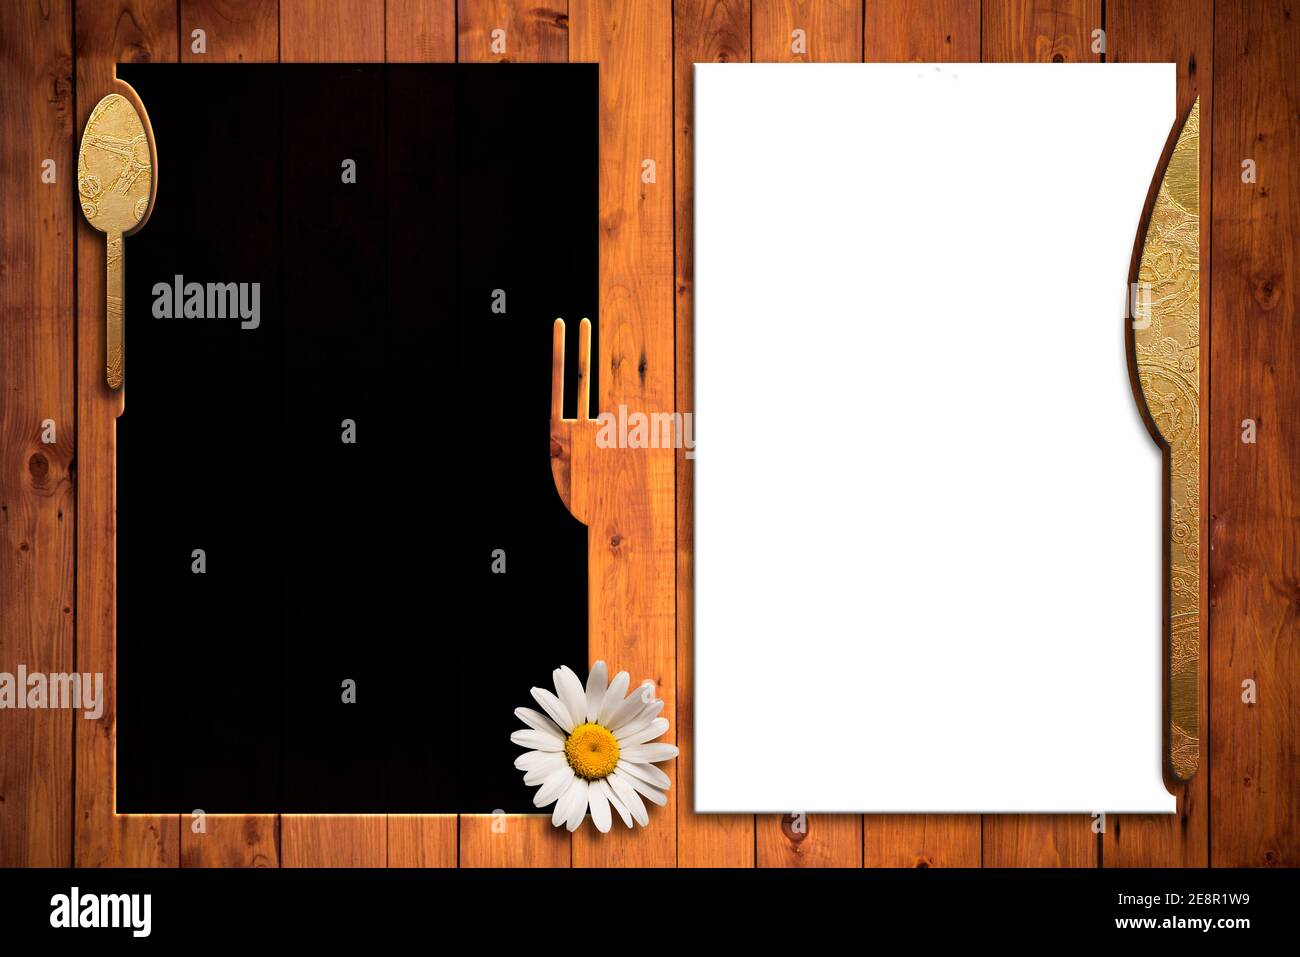 Backgrounds for restaurant menu. Two empty black and white boards and daisy  on a wooden background Stock Photo - Alamy